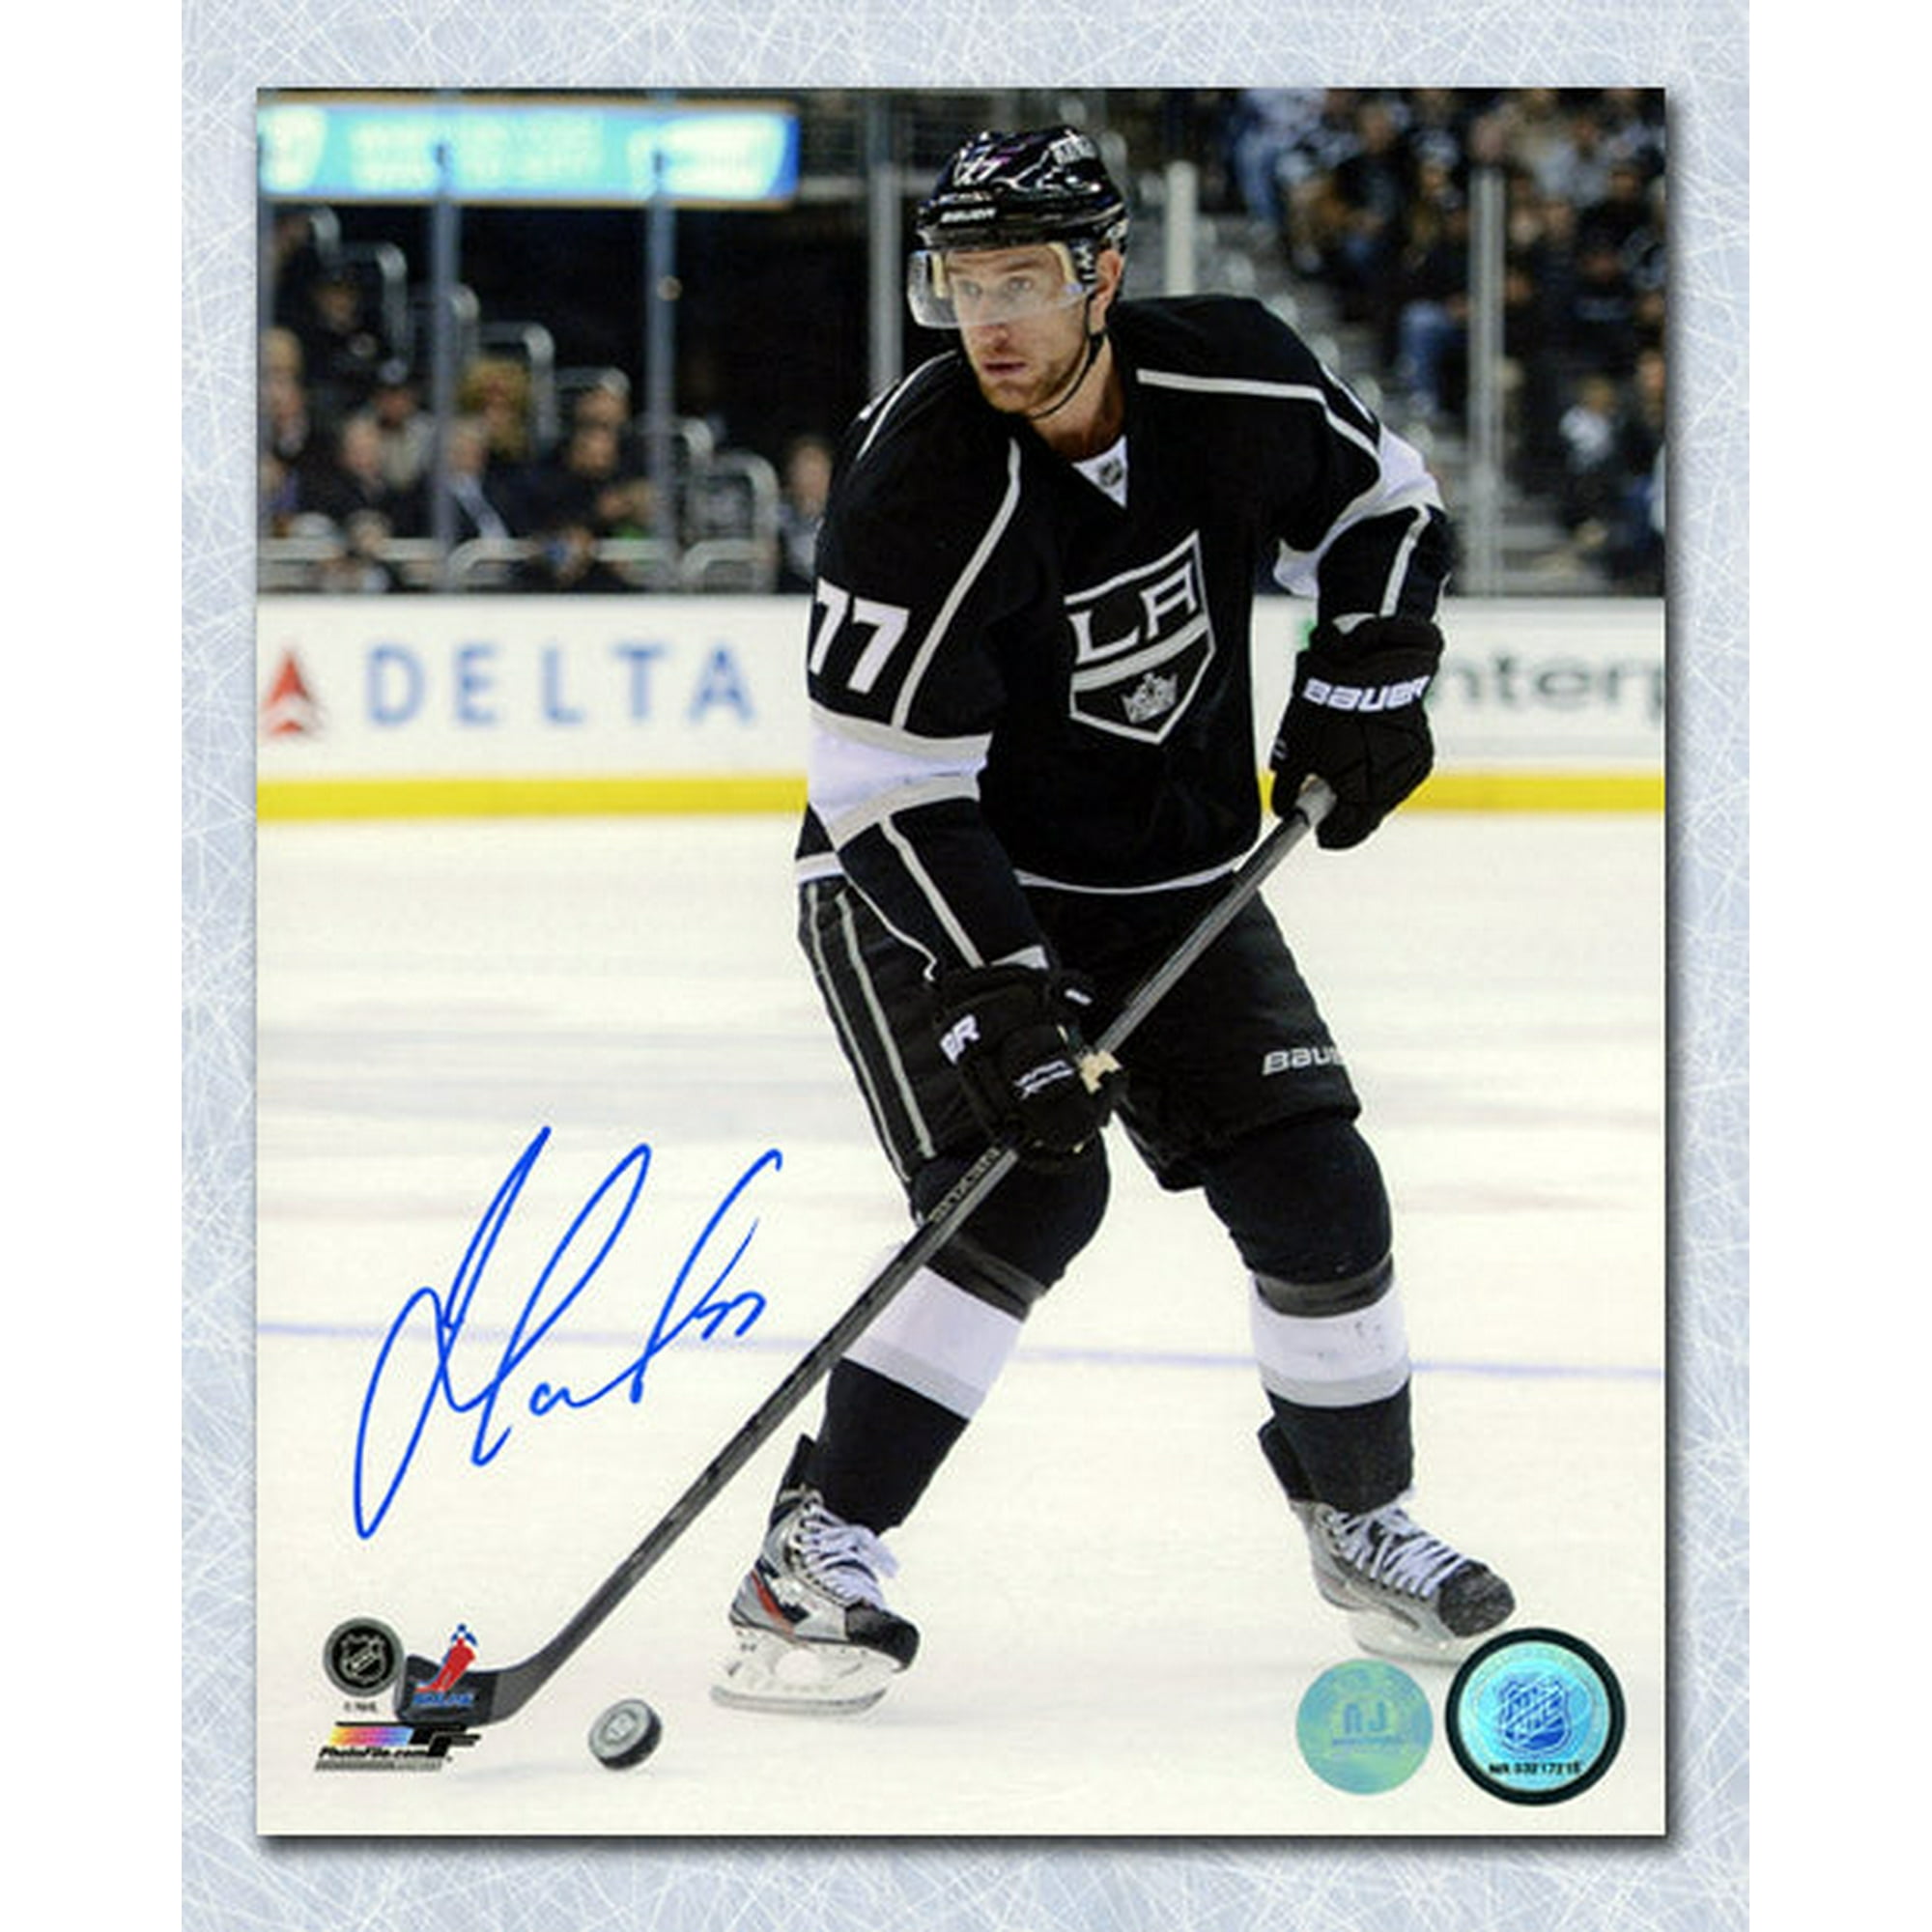 Jeff Carter Signed, Inscribed 2012 SCC Los Angeles Kings 8x10